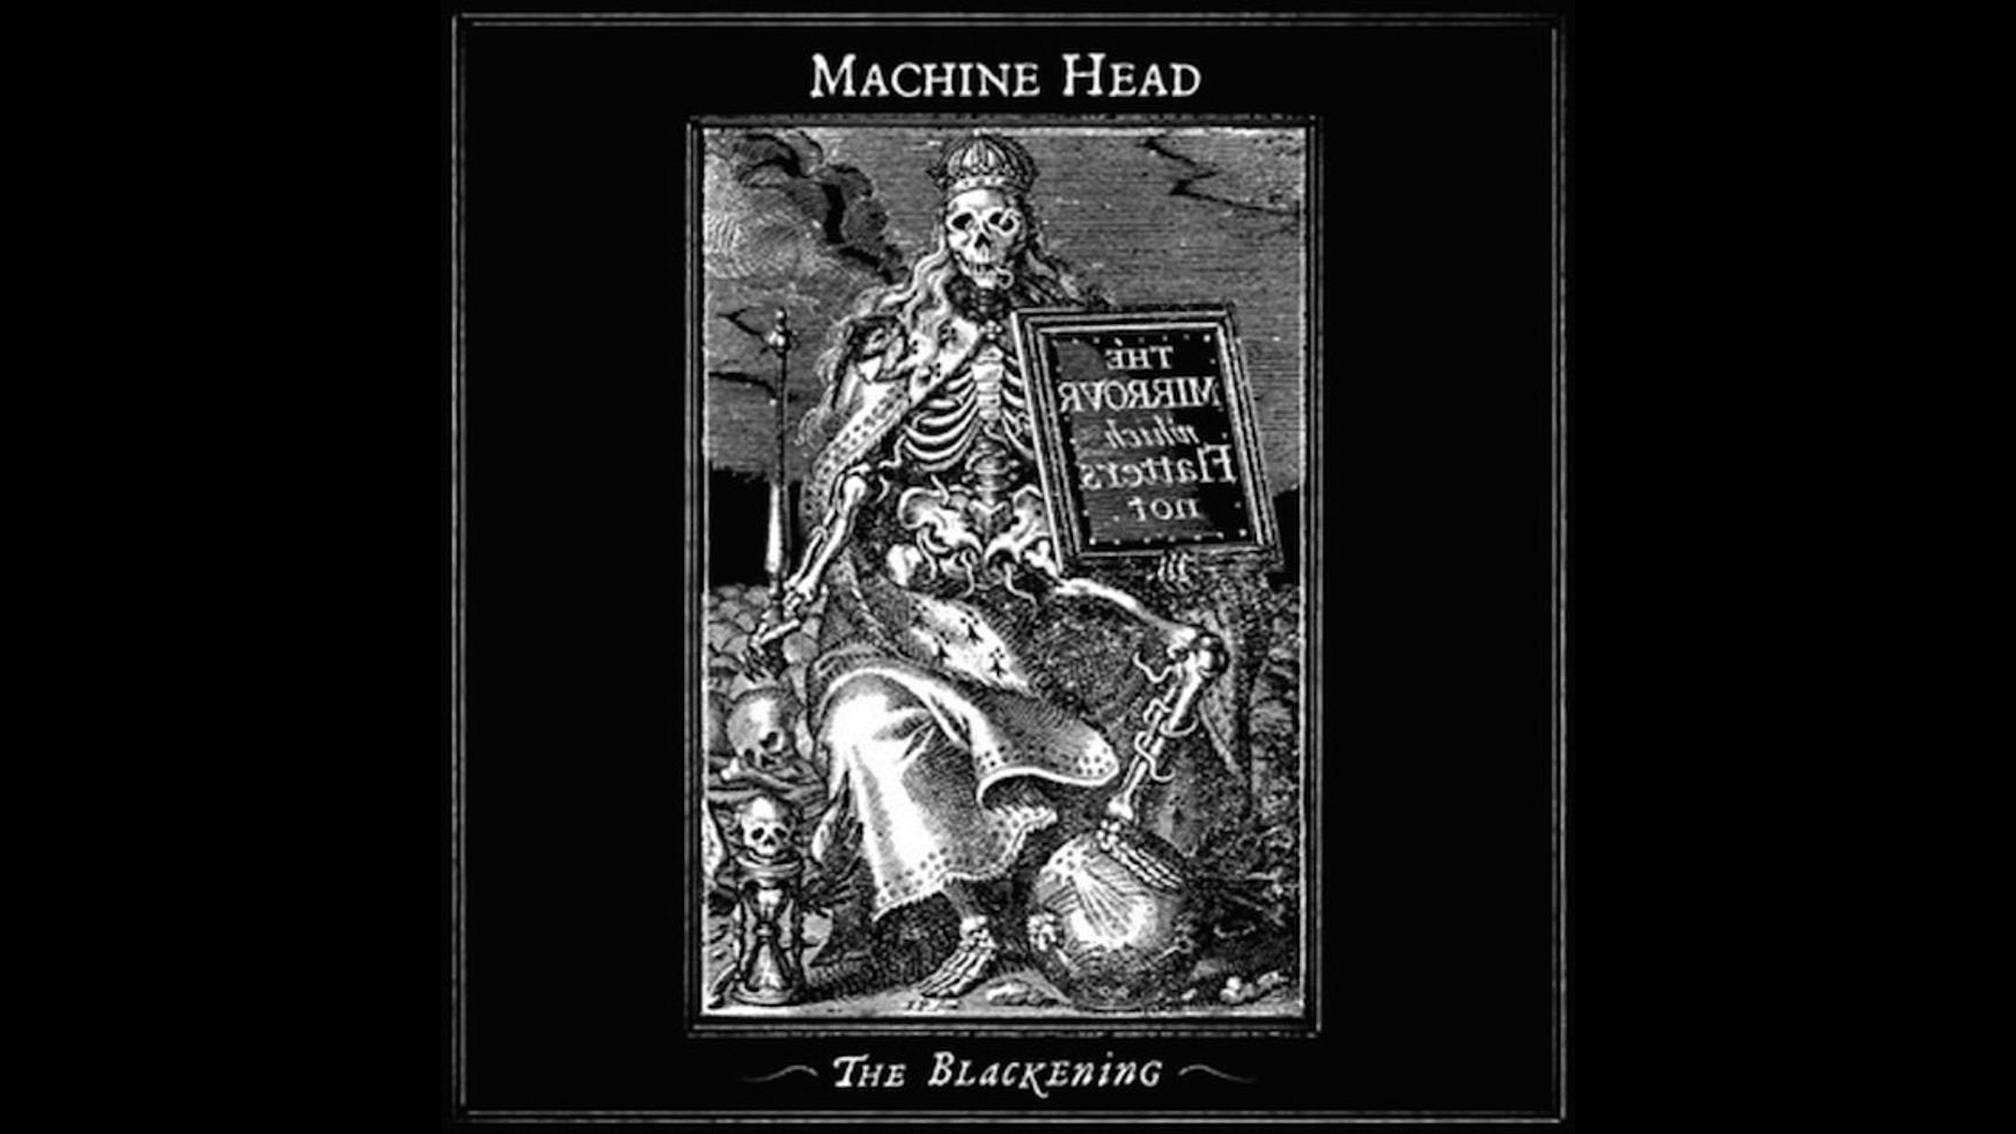 Machine Head announce limited edition The Blackening cassette and picture disc vinyl